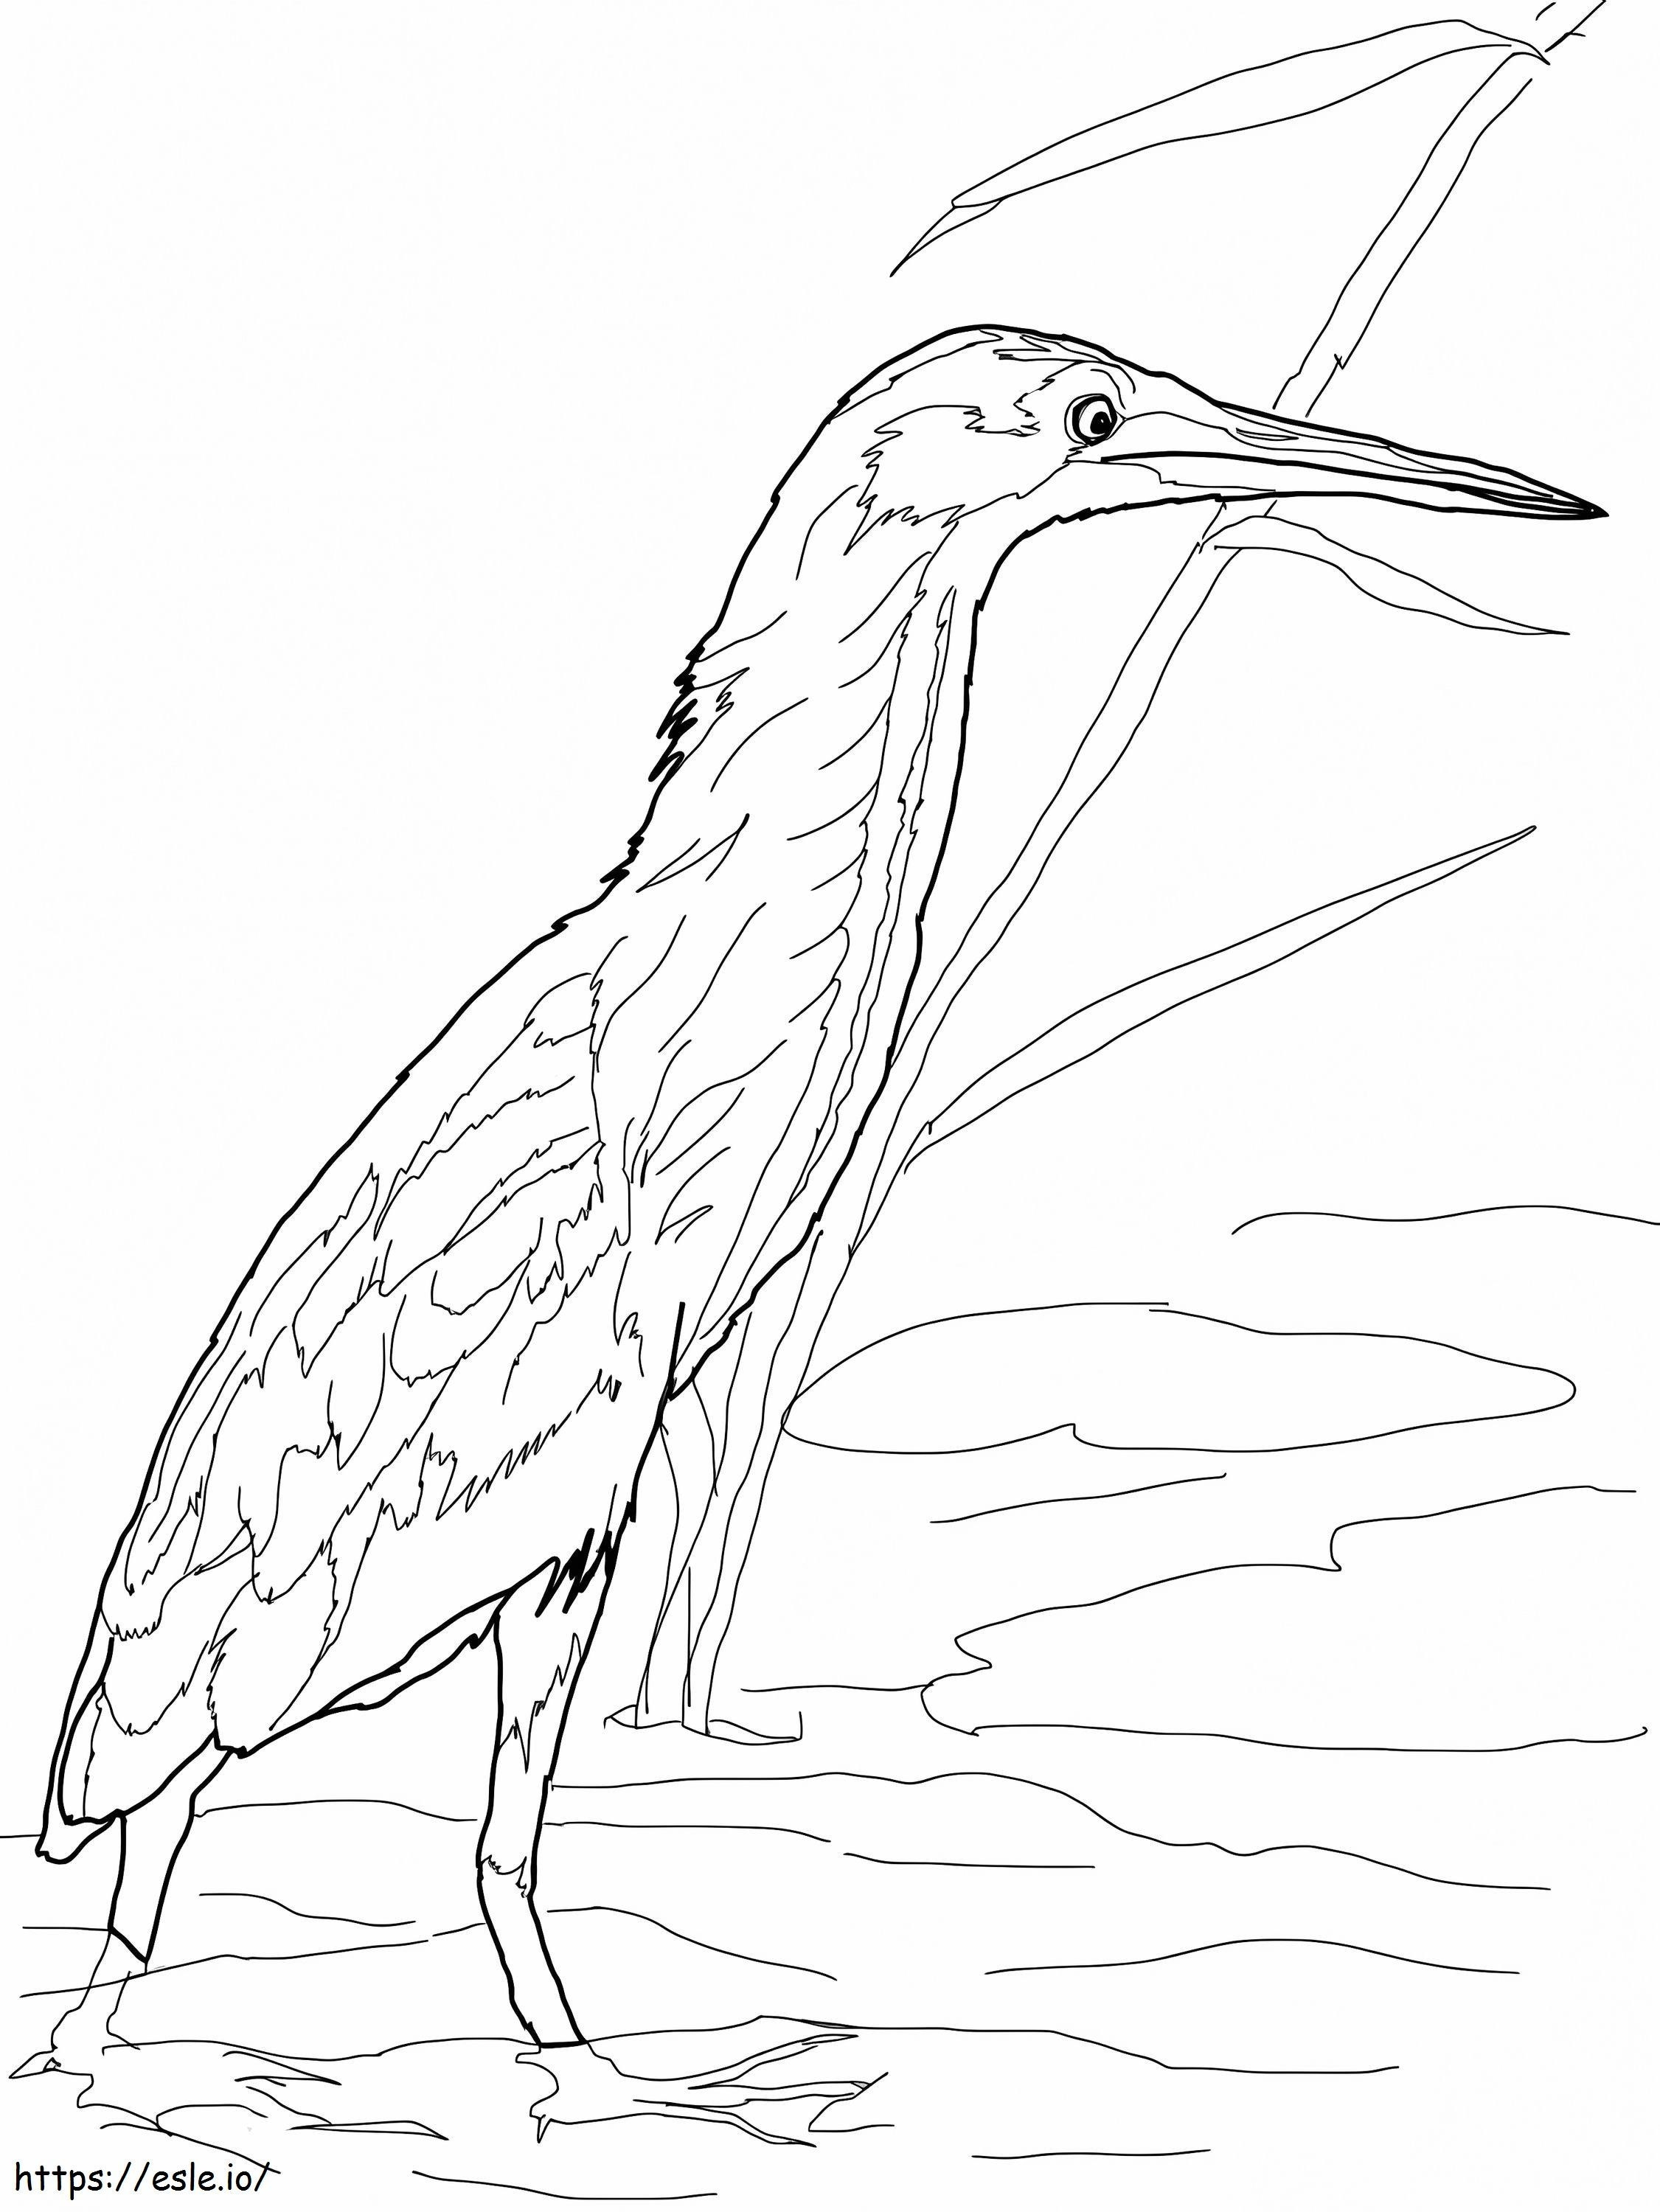 Yellow Bittern coloring page